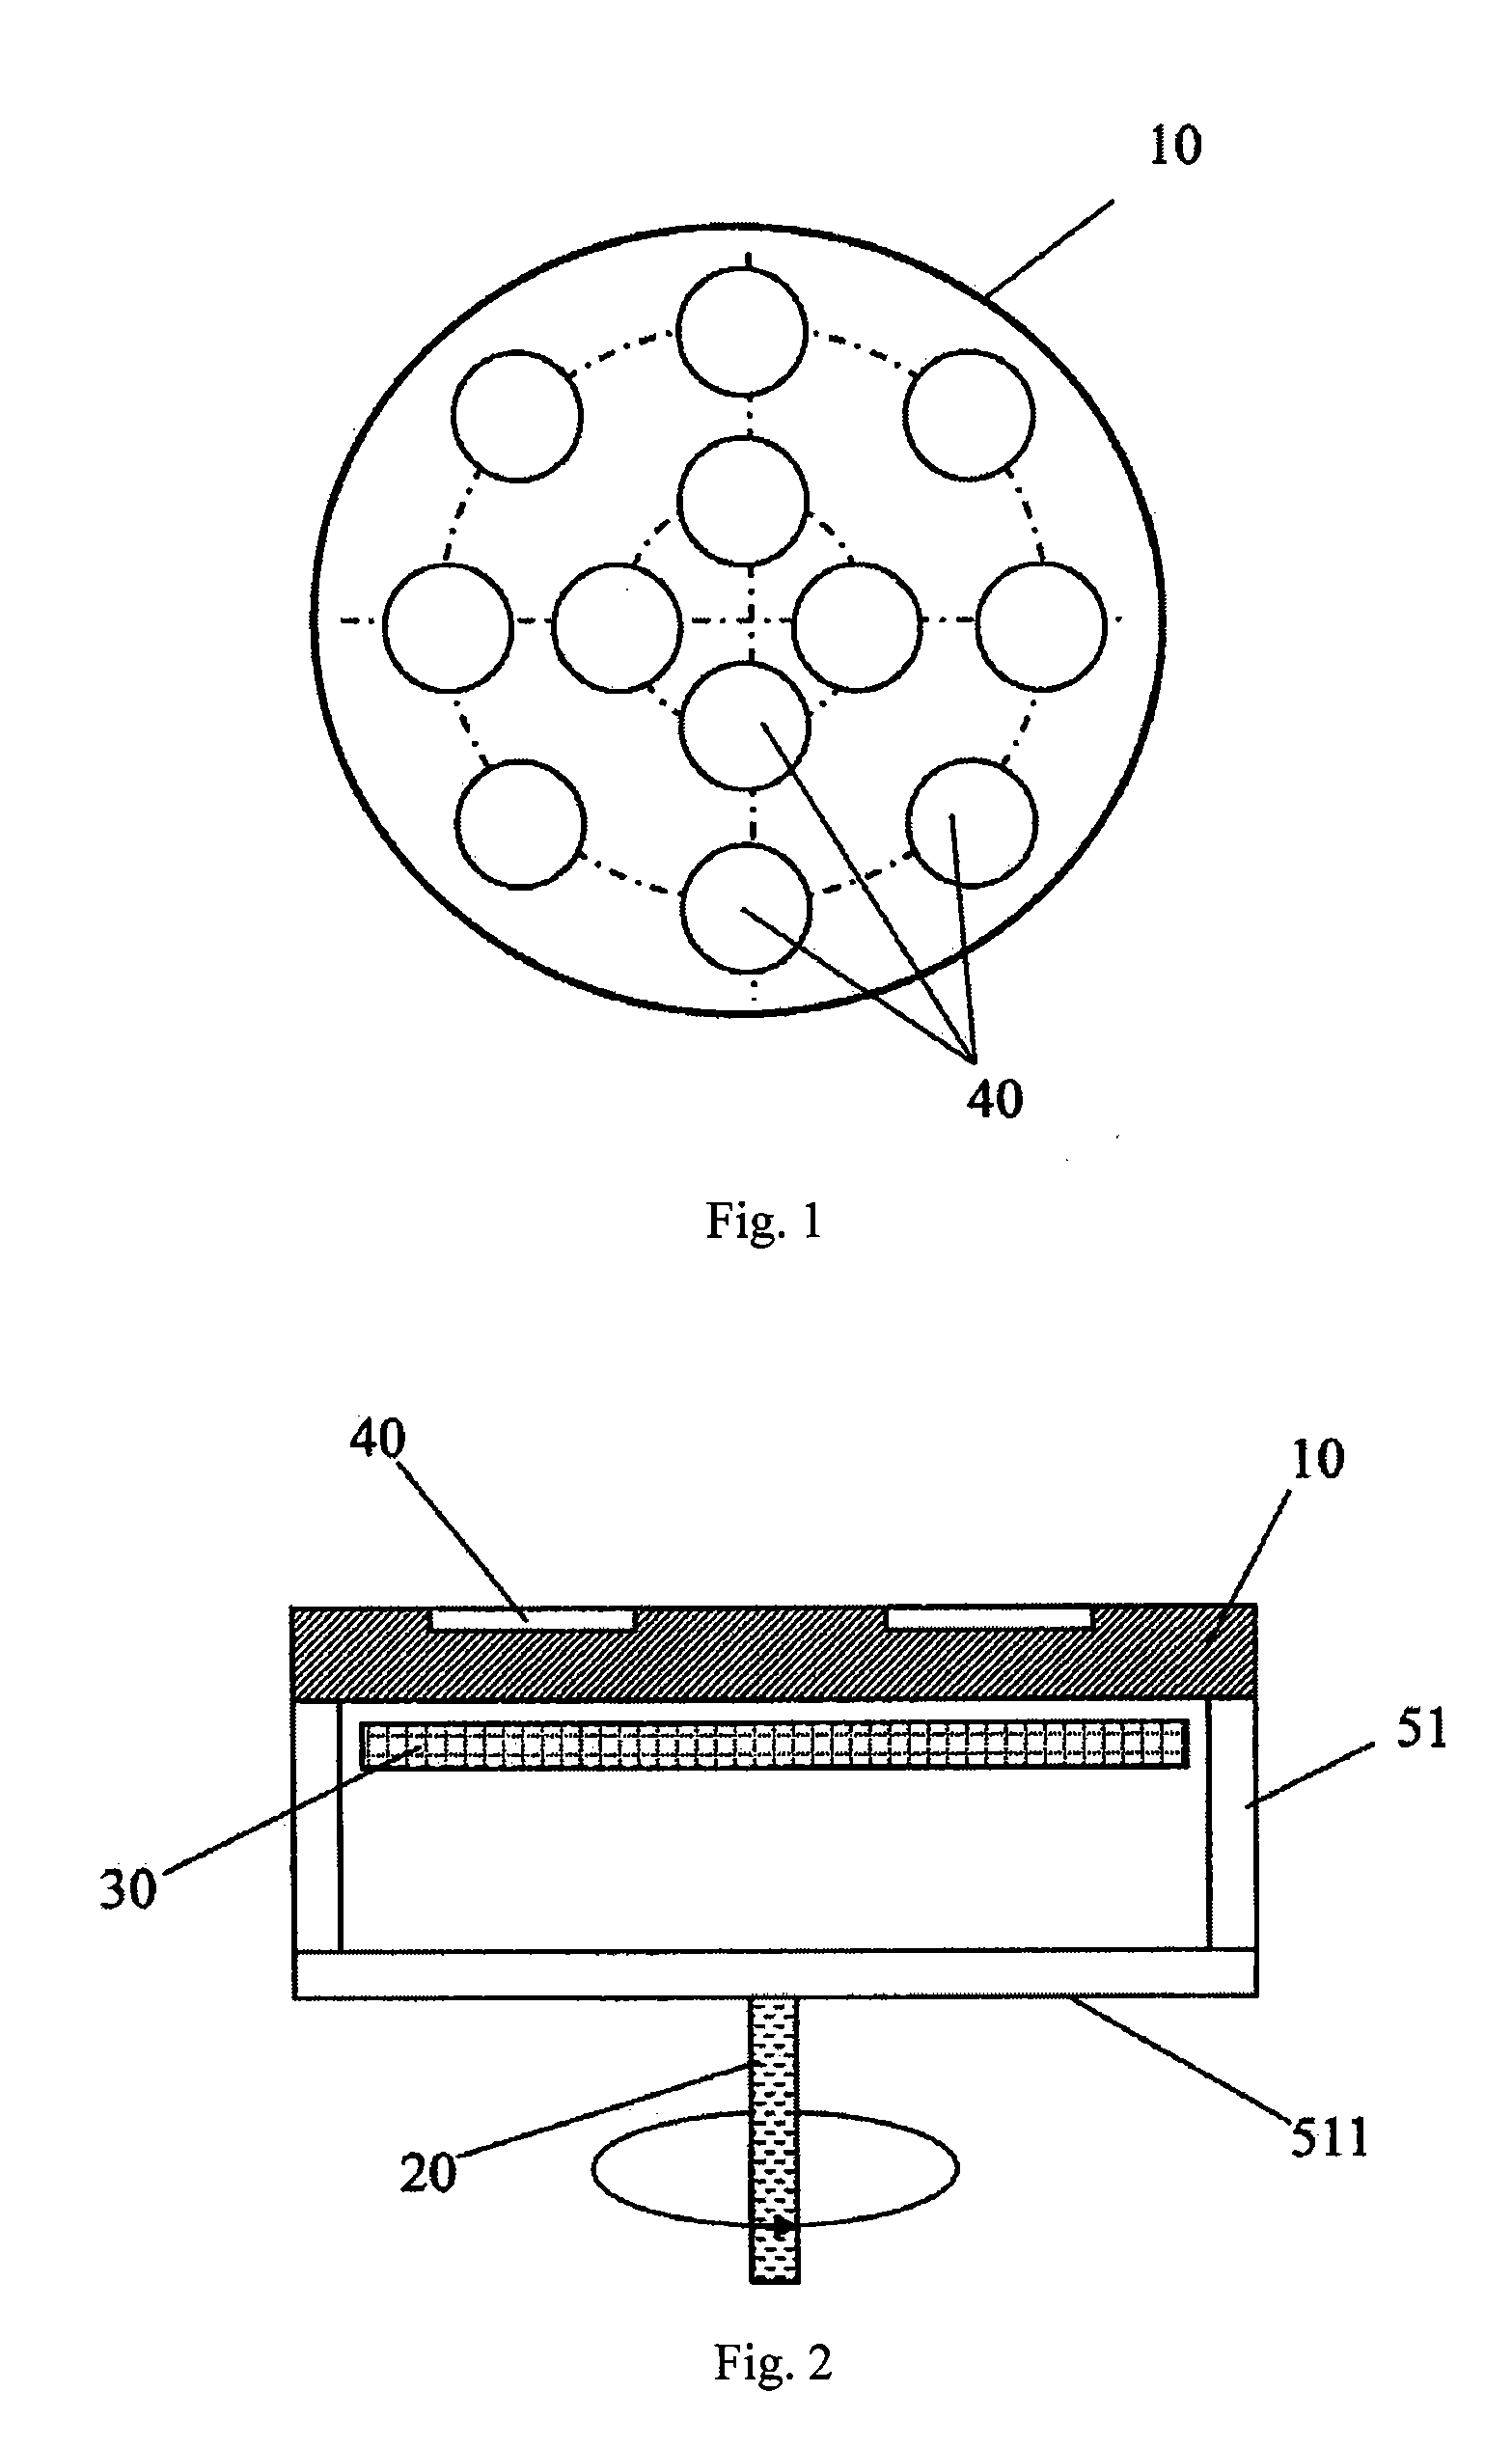 Epitaxial wafer susceptor and supportive and rotational connection apparatus matching the susceptor